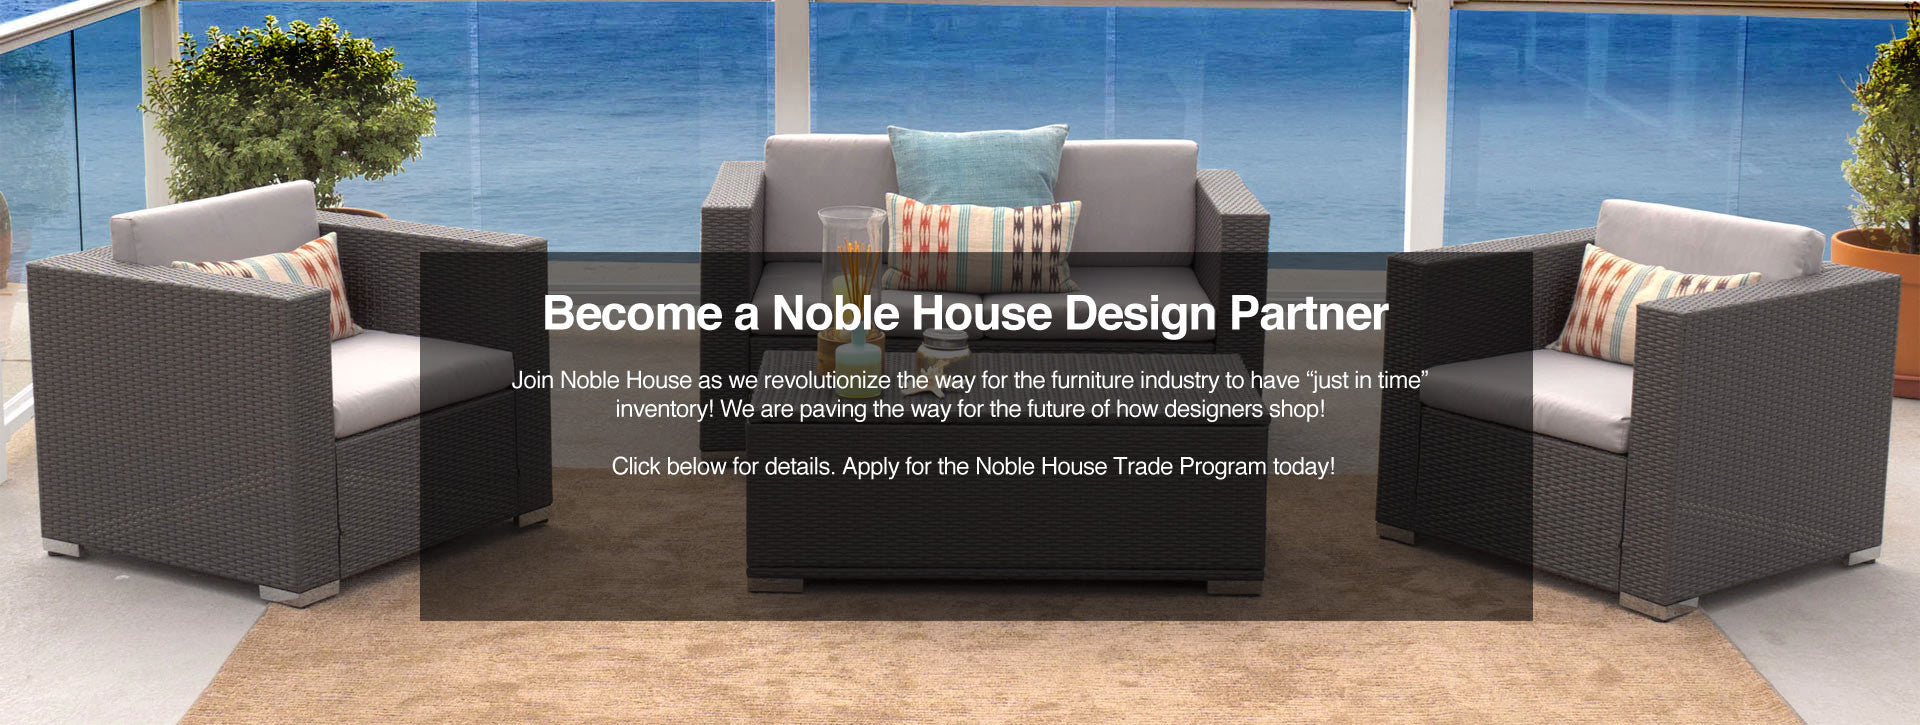 noble house home furniture